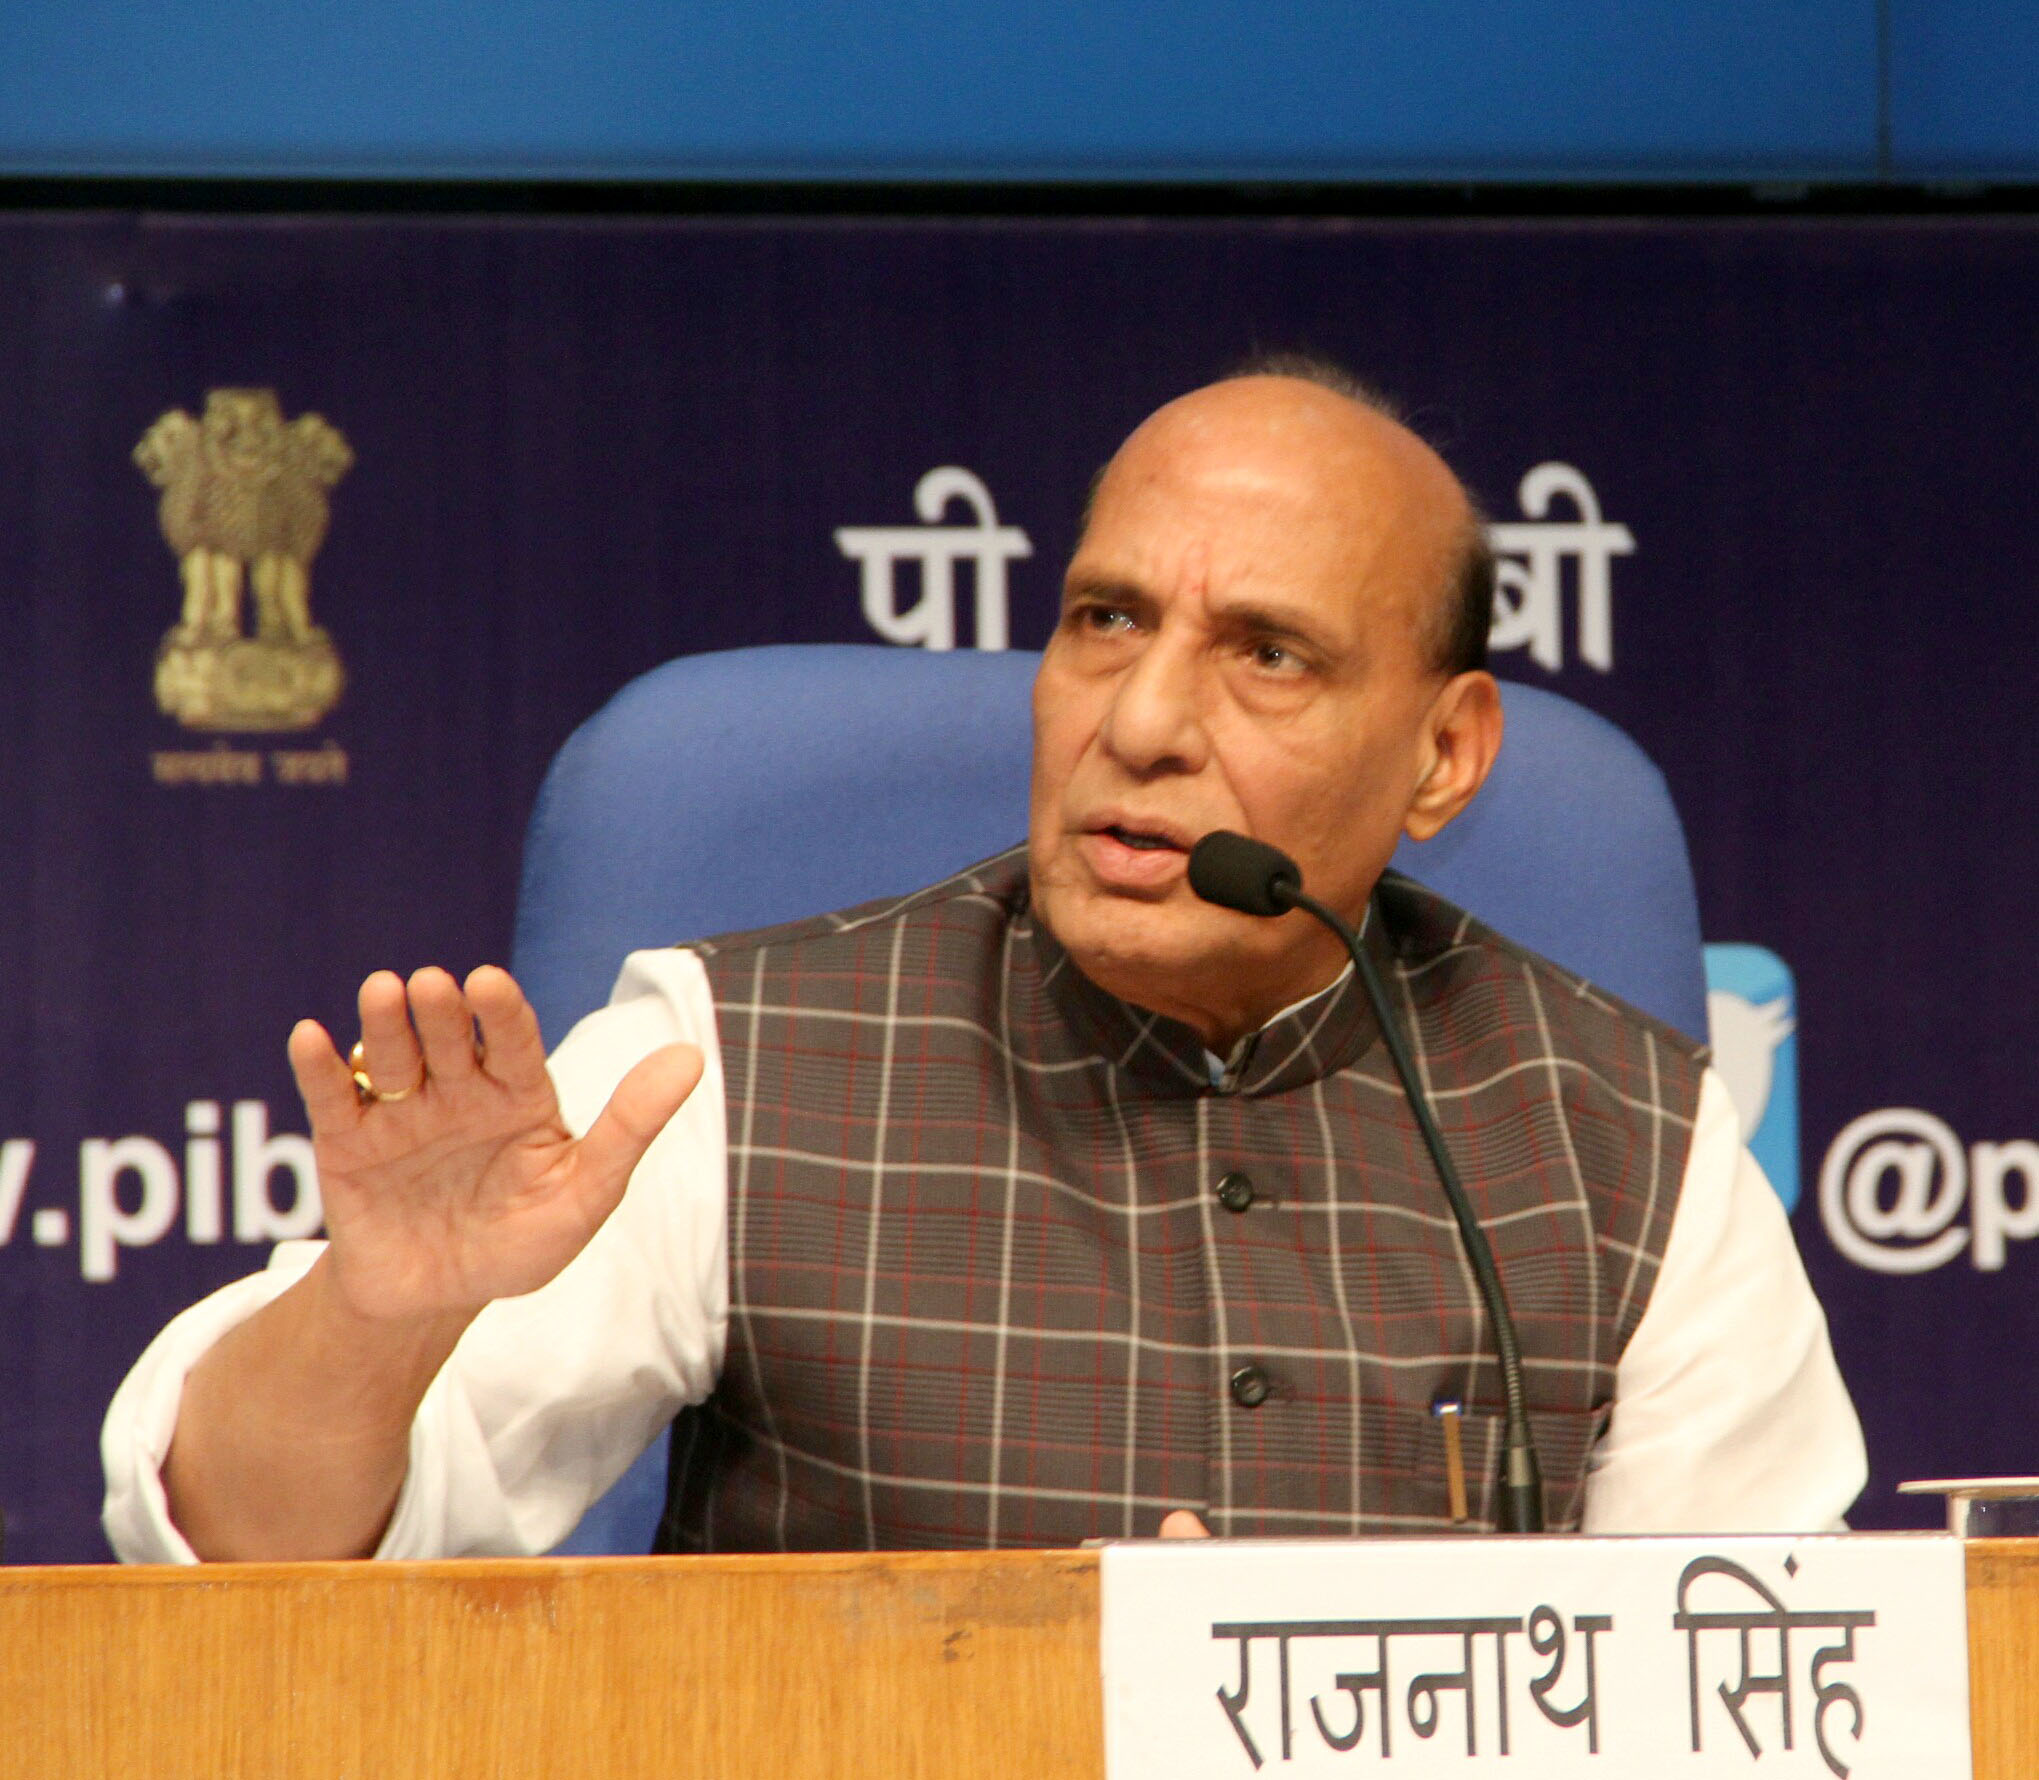 The Union Home Minister, Shri Rajnath Singh addressing at a press conference on the Achievements and Initiatives of the Ministry of Home Affairs during 3 years of NDA Government, in New Delhi on June 03, 2017.